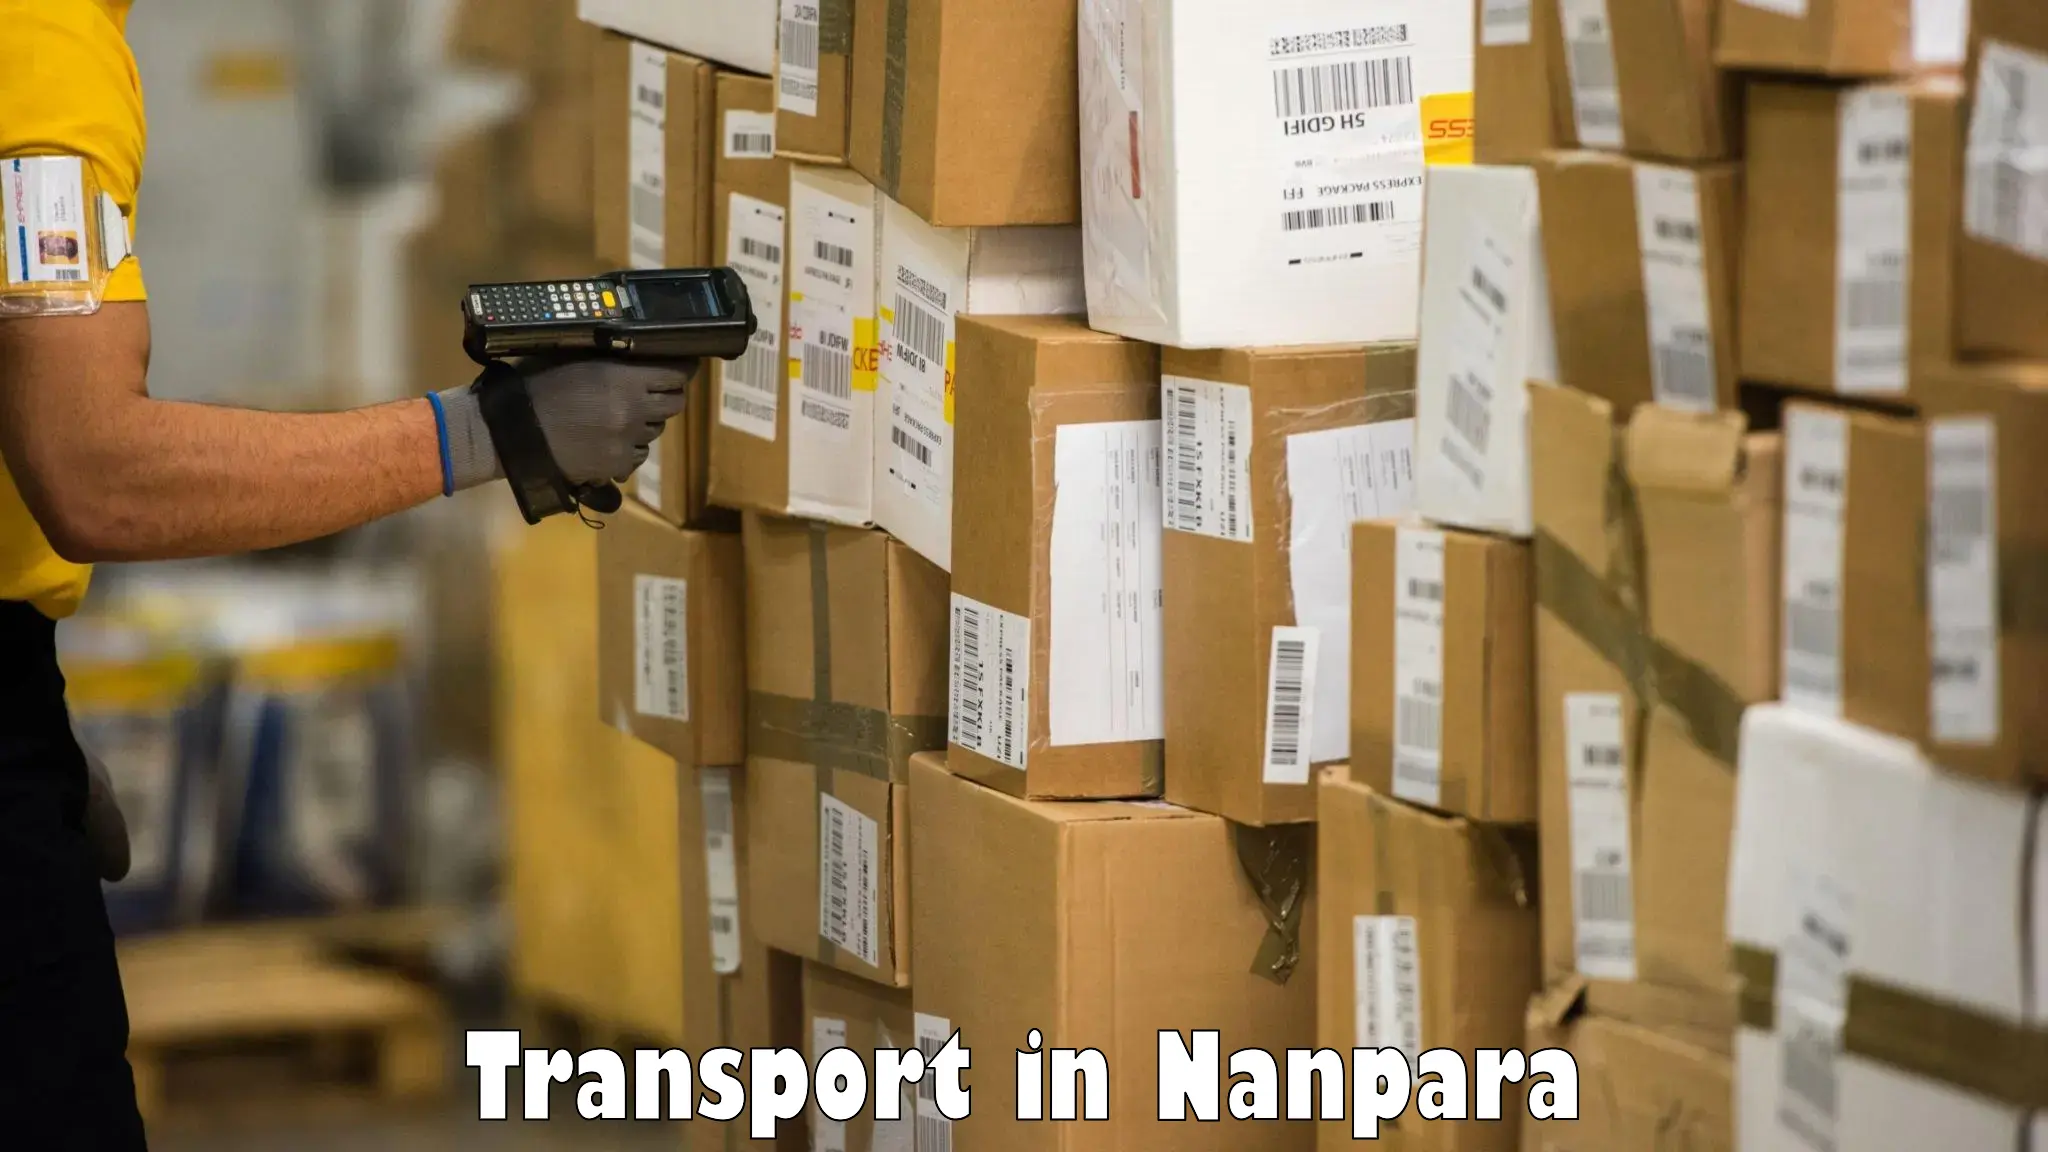 Vehicle transport services in Nanpara